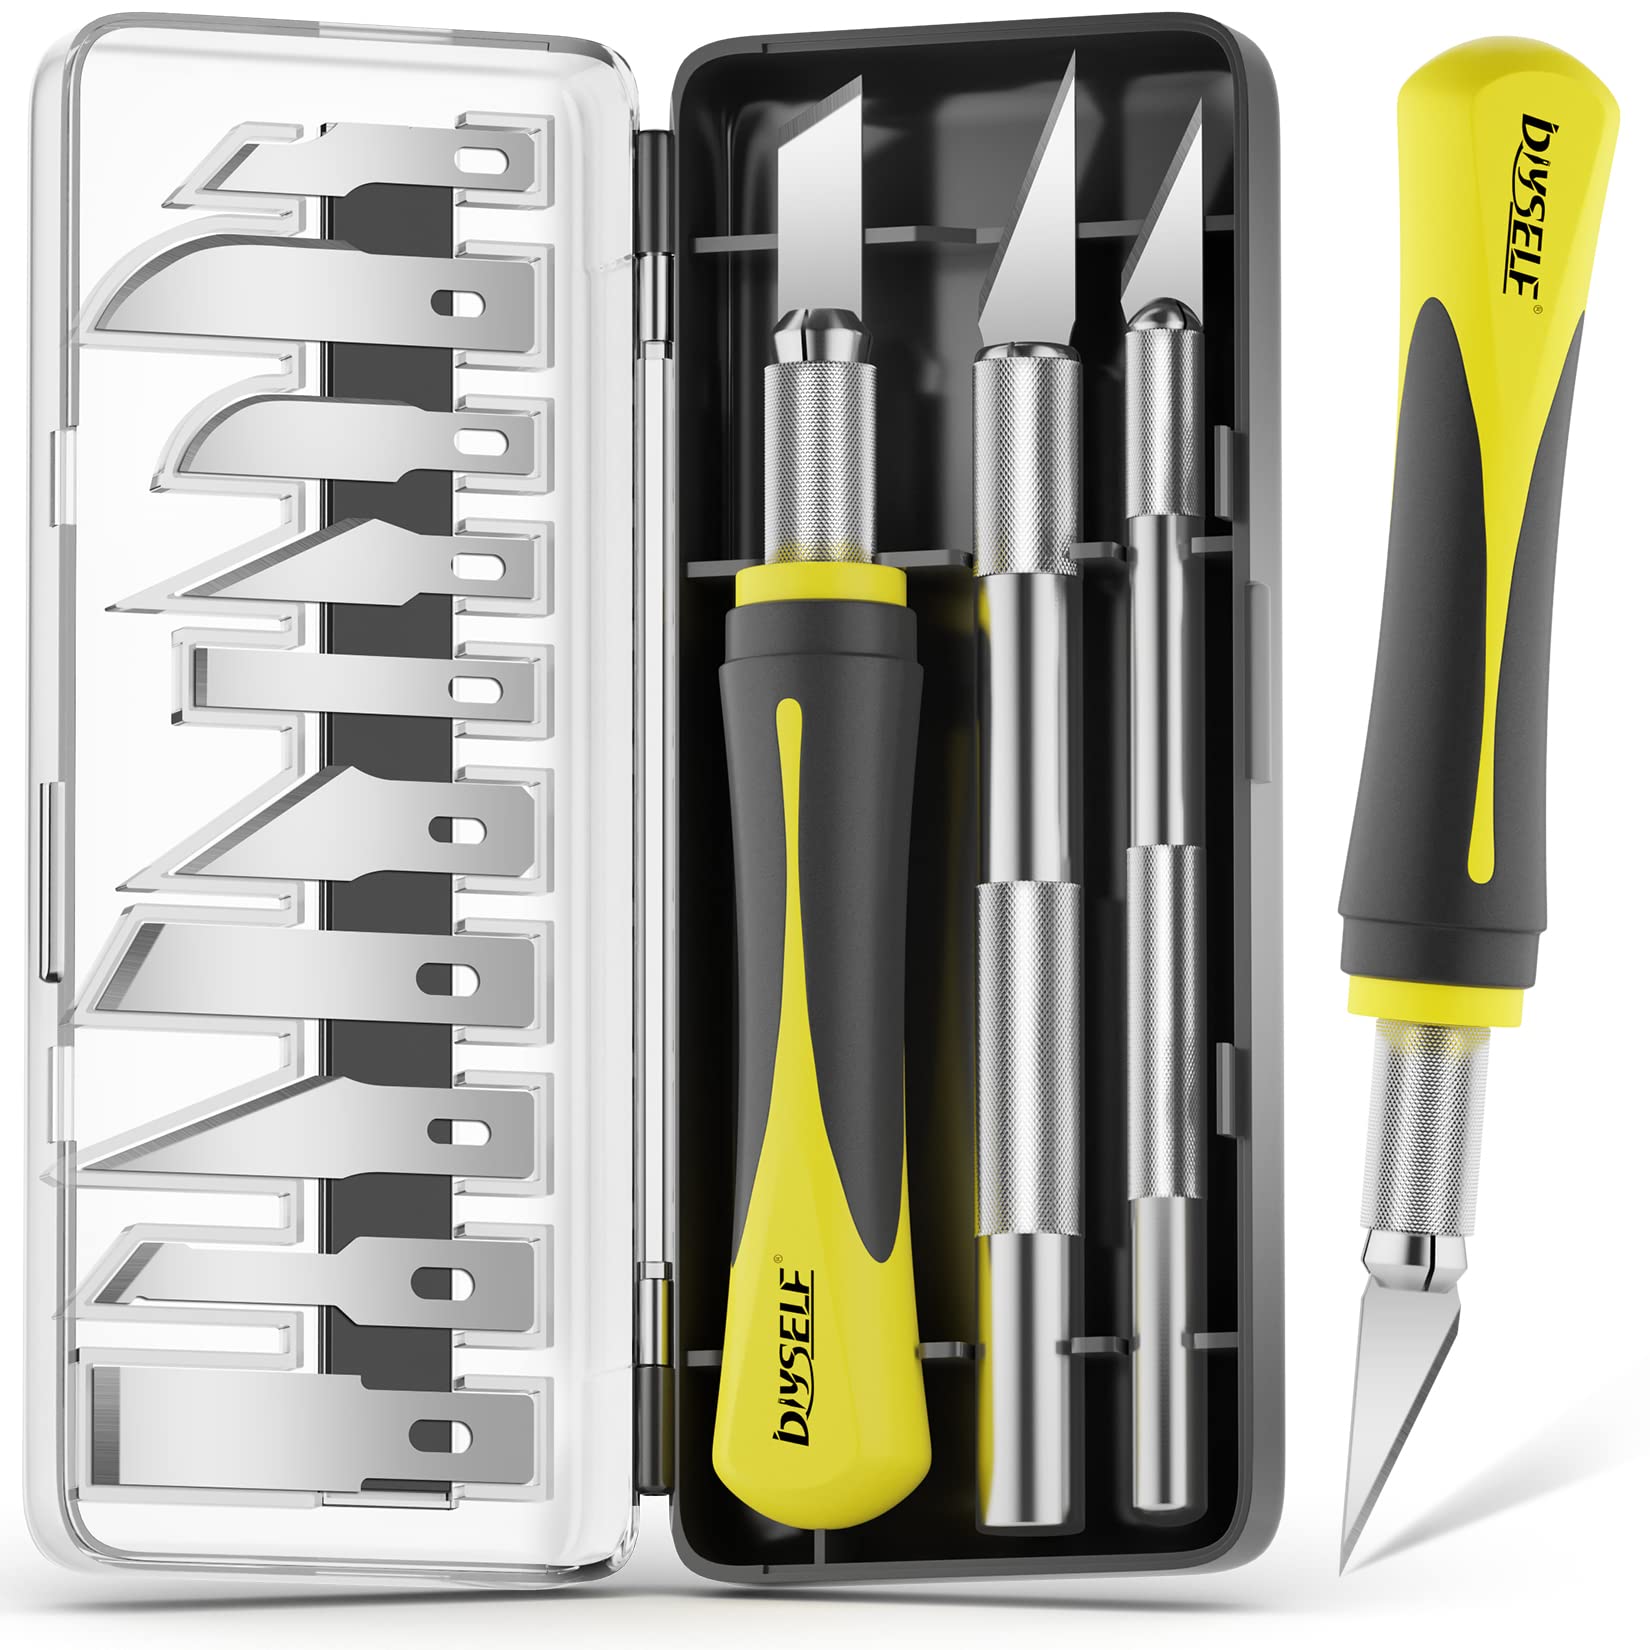 DIYSELF 16-Piece Craft Knife Set 3-Piece Hobby Knife with 10-Piece Exacto  Blades Precision Art Knife for Pumpkin Carving Modeling Exactly Knife